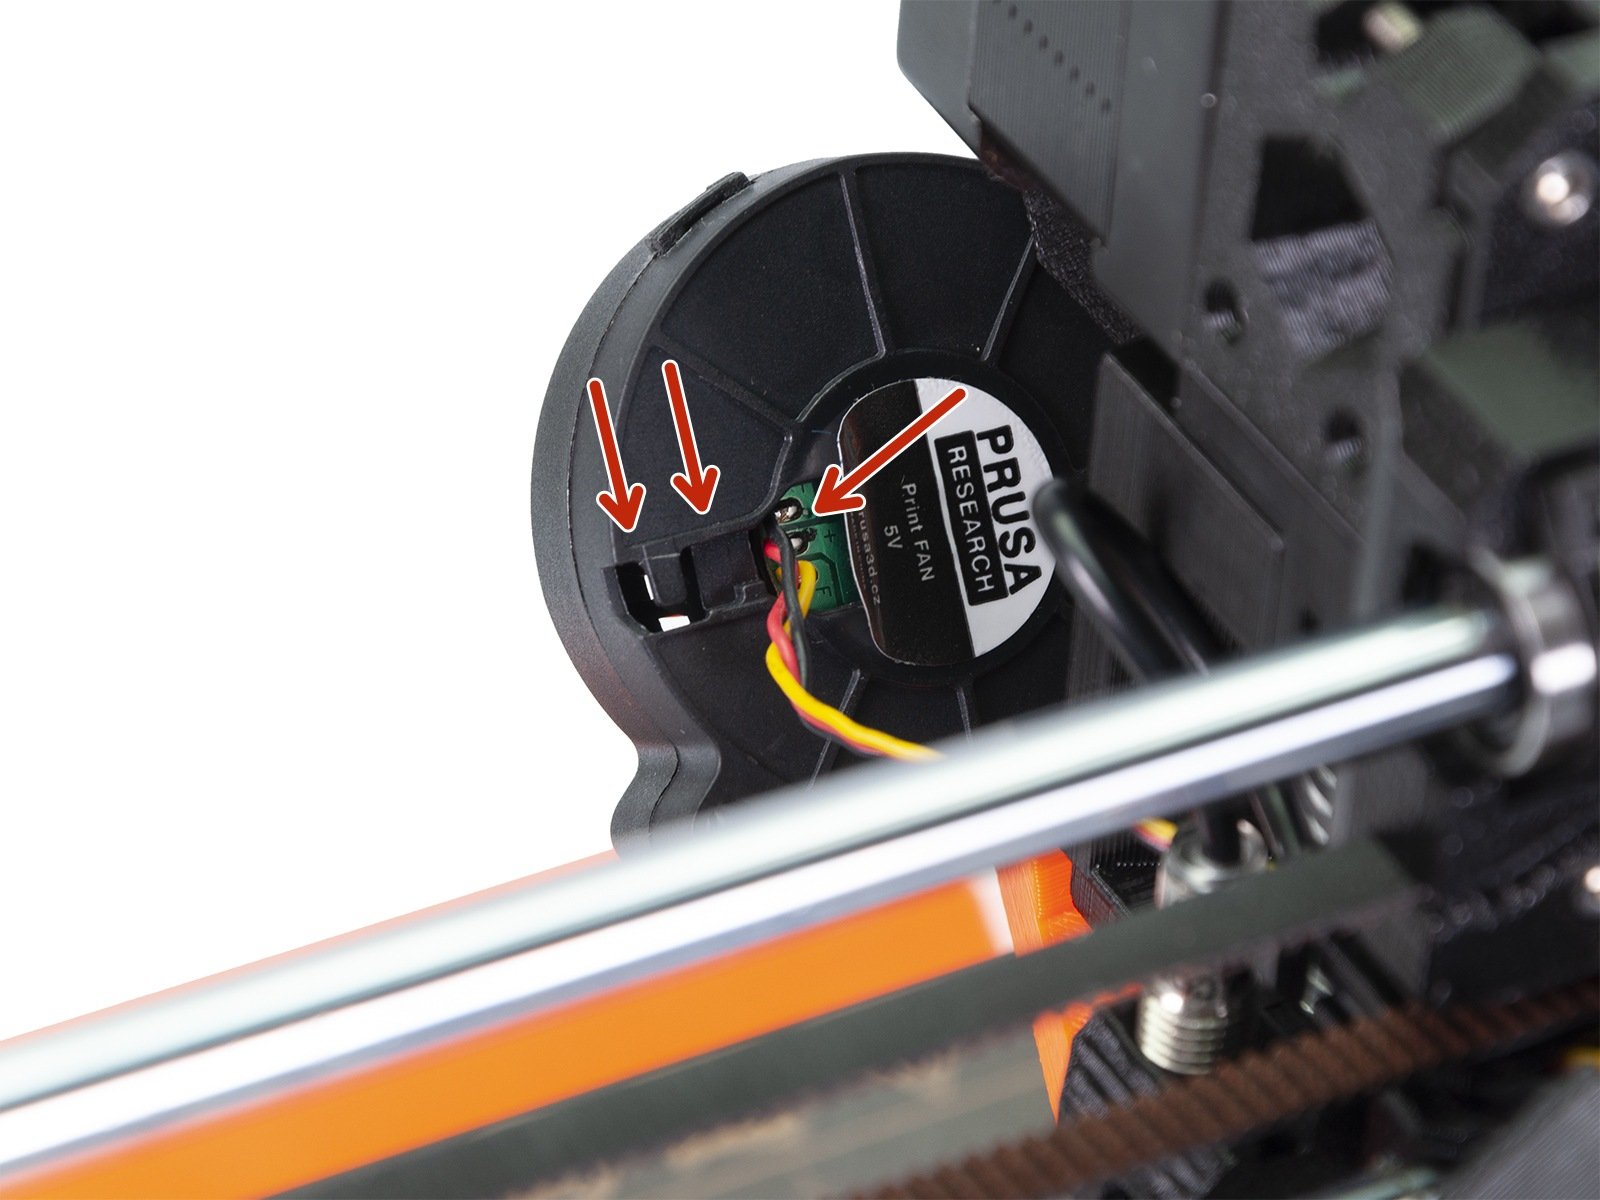 Mounting the front print fan - parts B7/R3